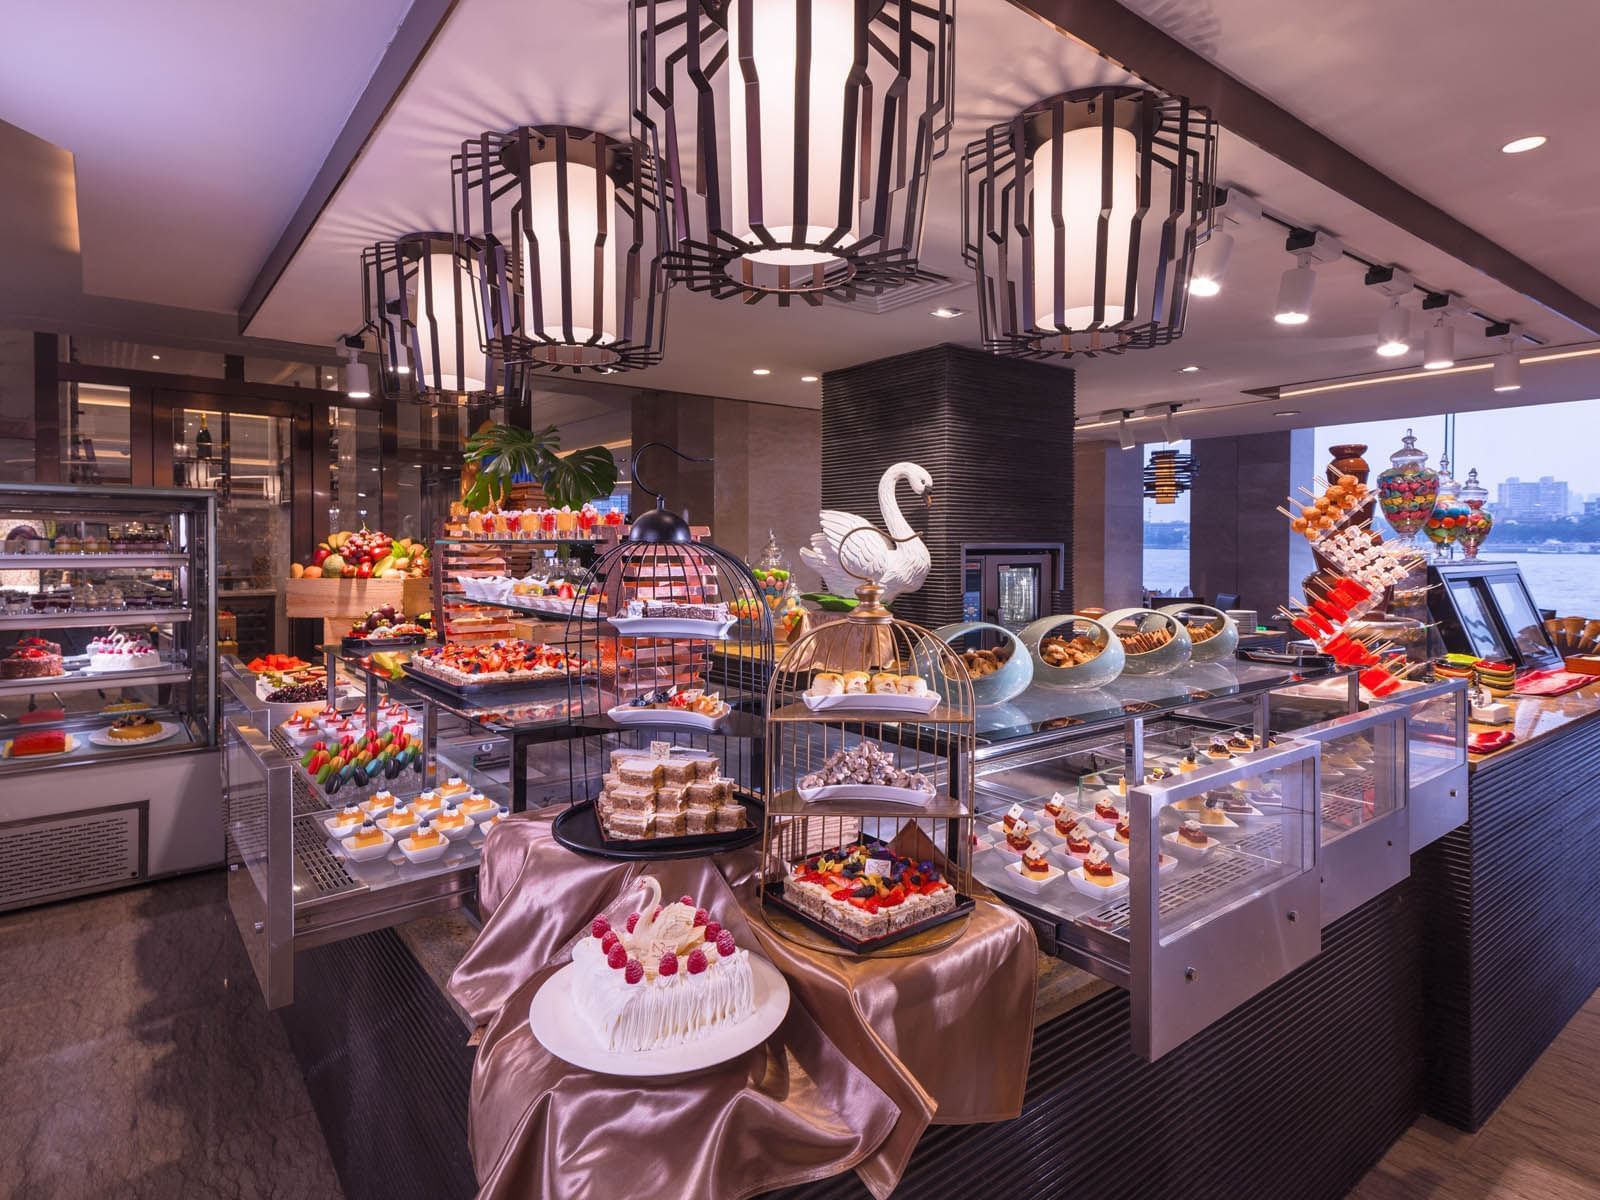 A display of Baked Goods in River Café at White Swan hotel